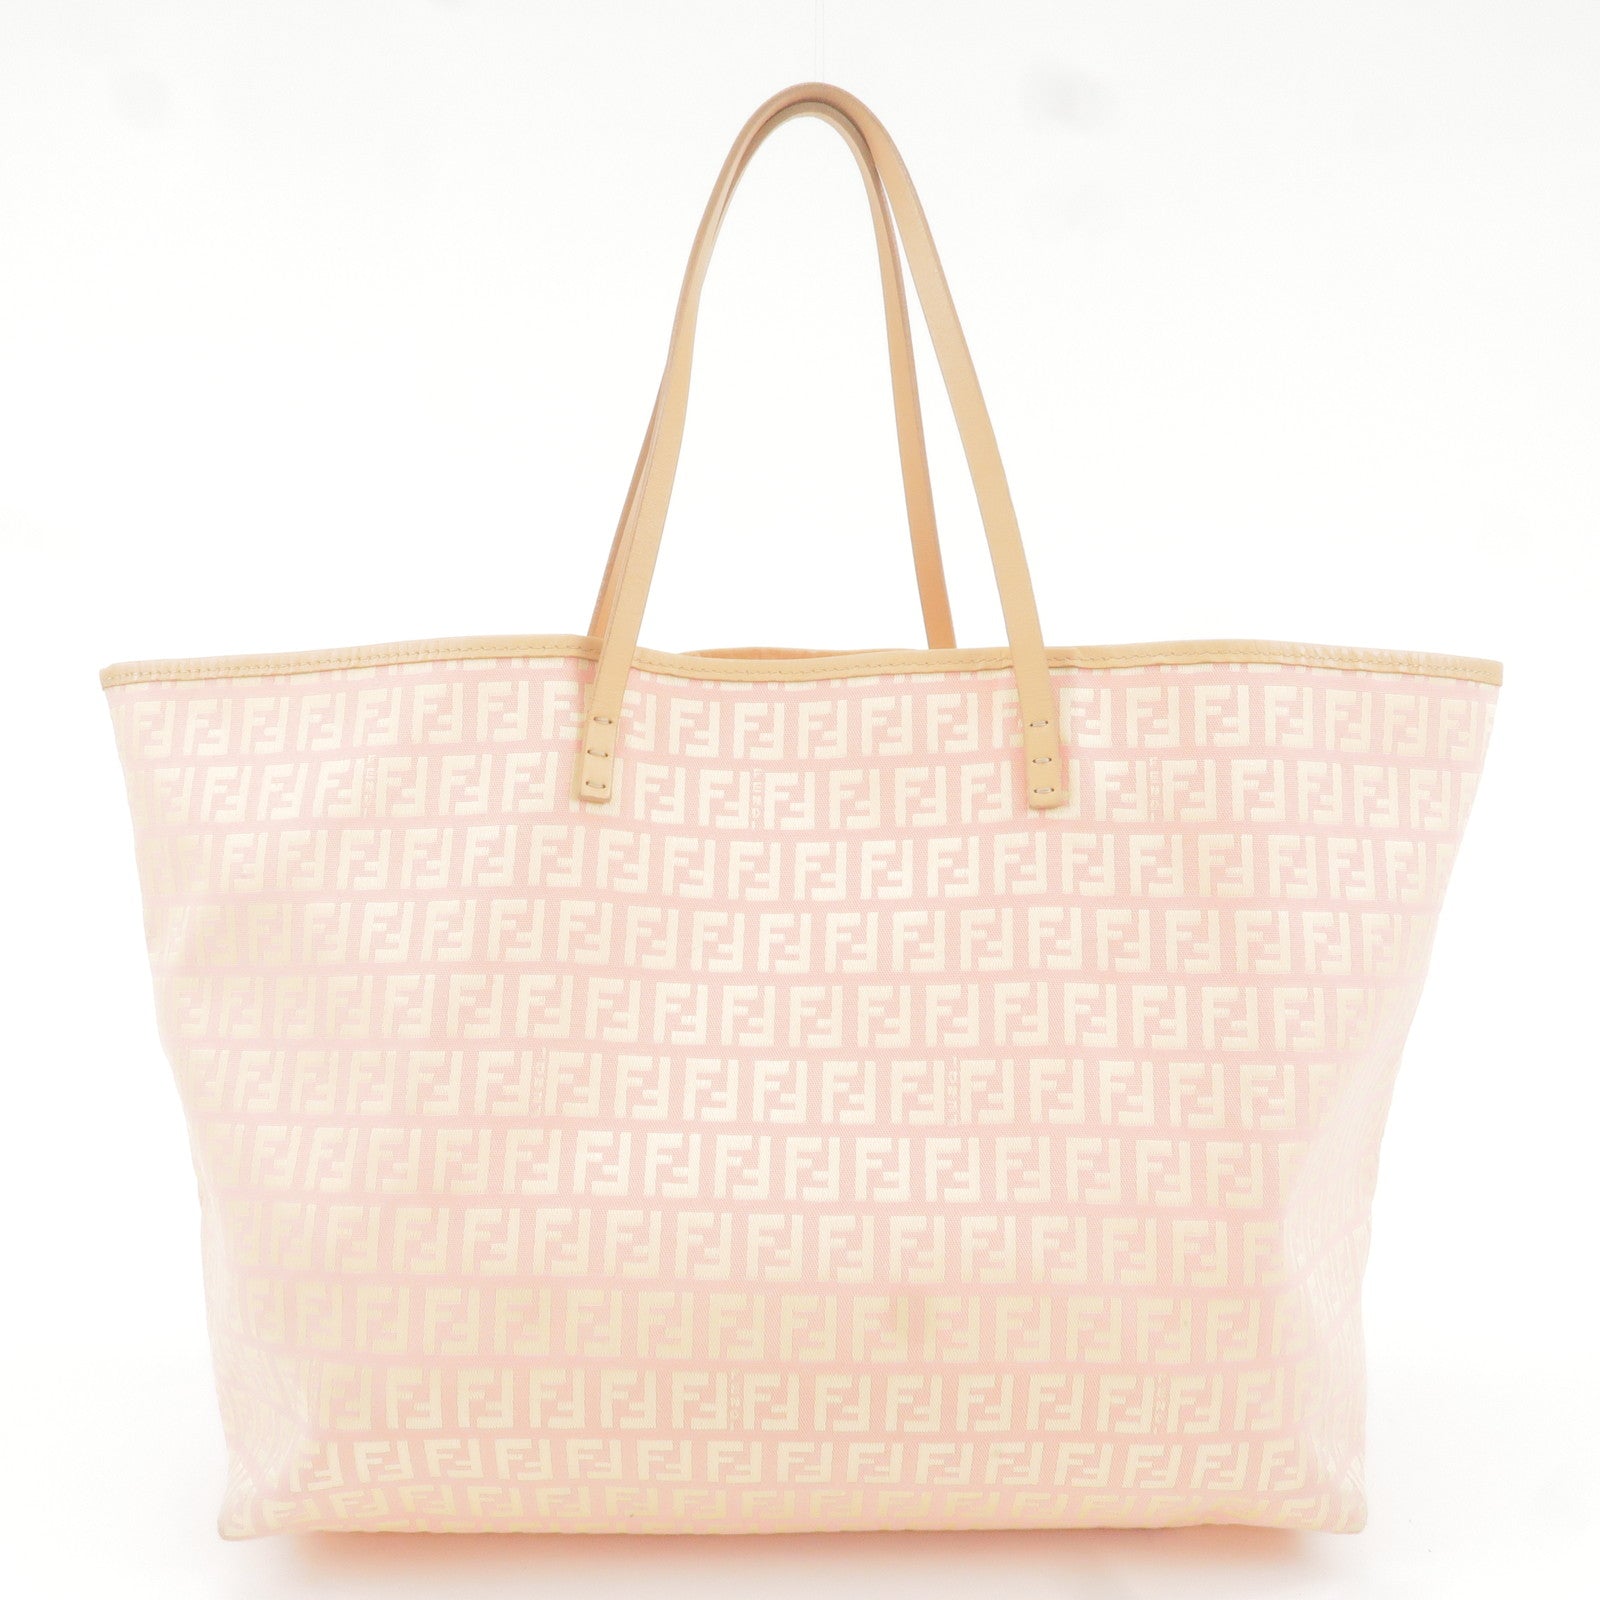 FENDI-Zucchino-Canvas-Leather-Tote-Bag-Pink-Beige-8BH025 – dct